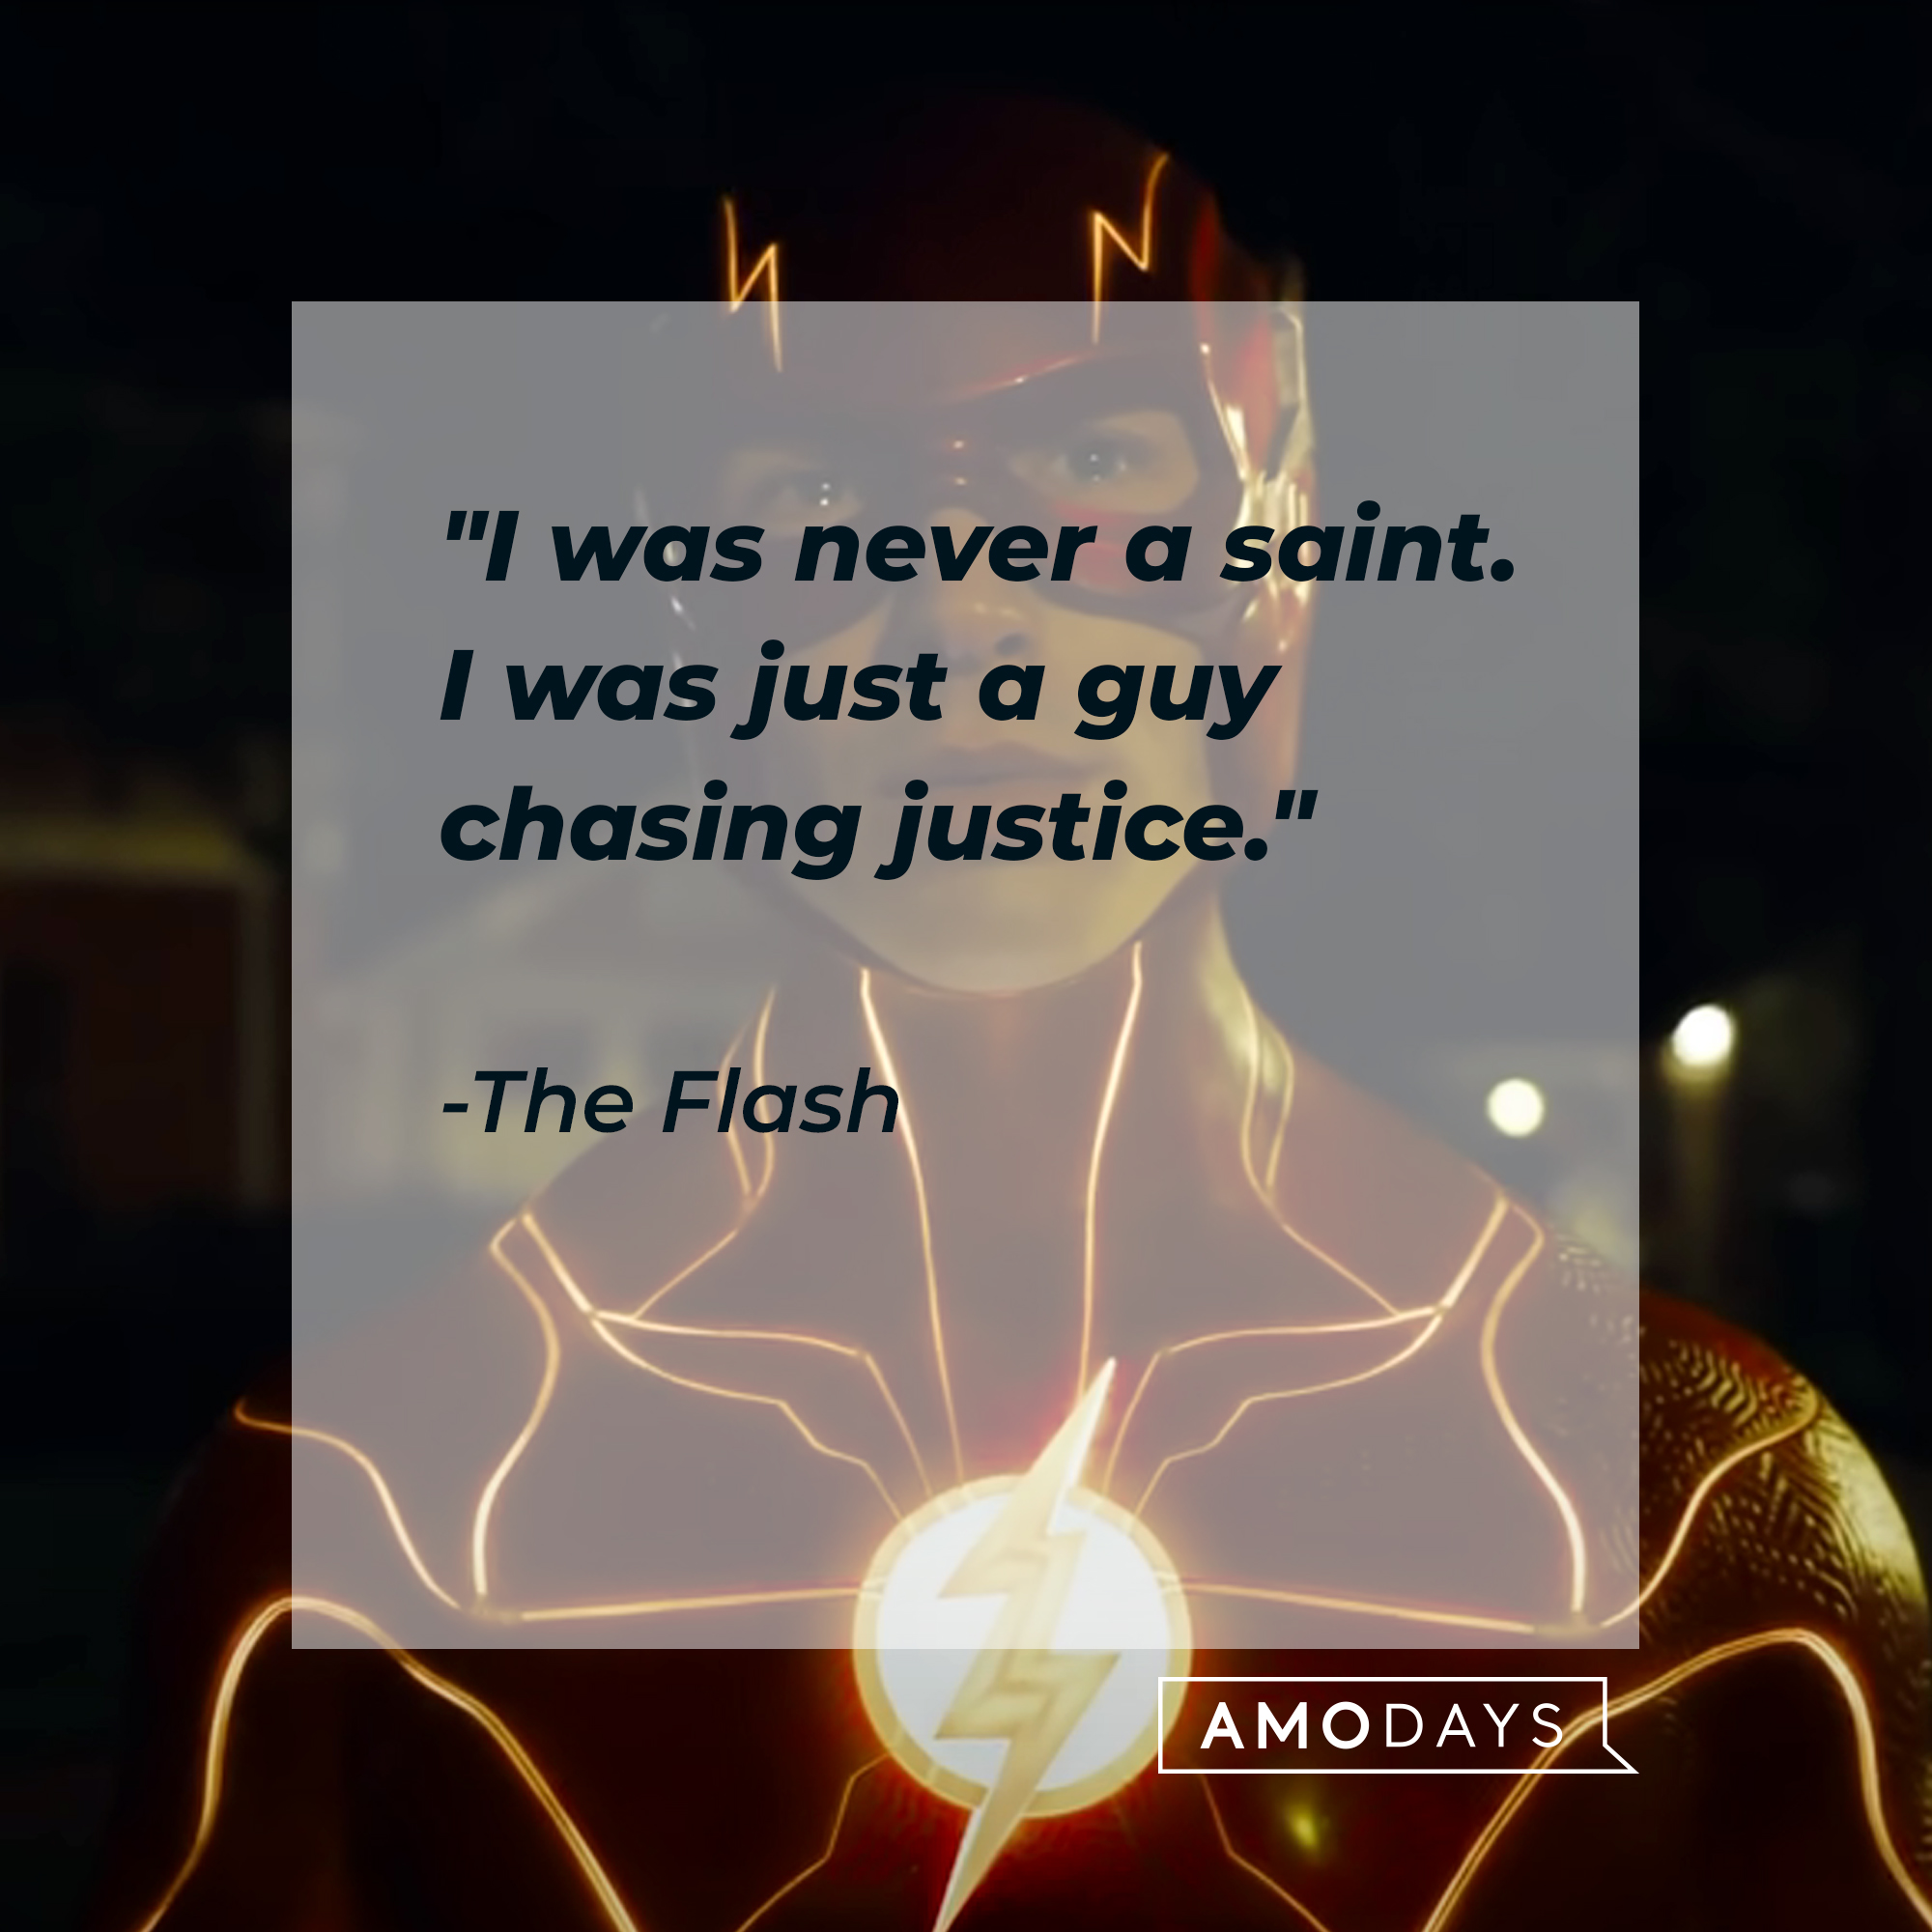 The Flash's quote: "I was never a saint. I was just a guy chasing justice." | Source: facebook.com/dc